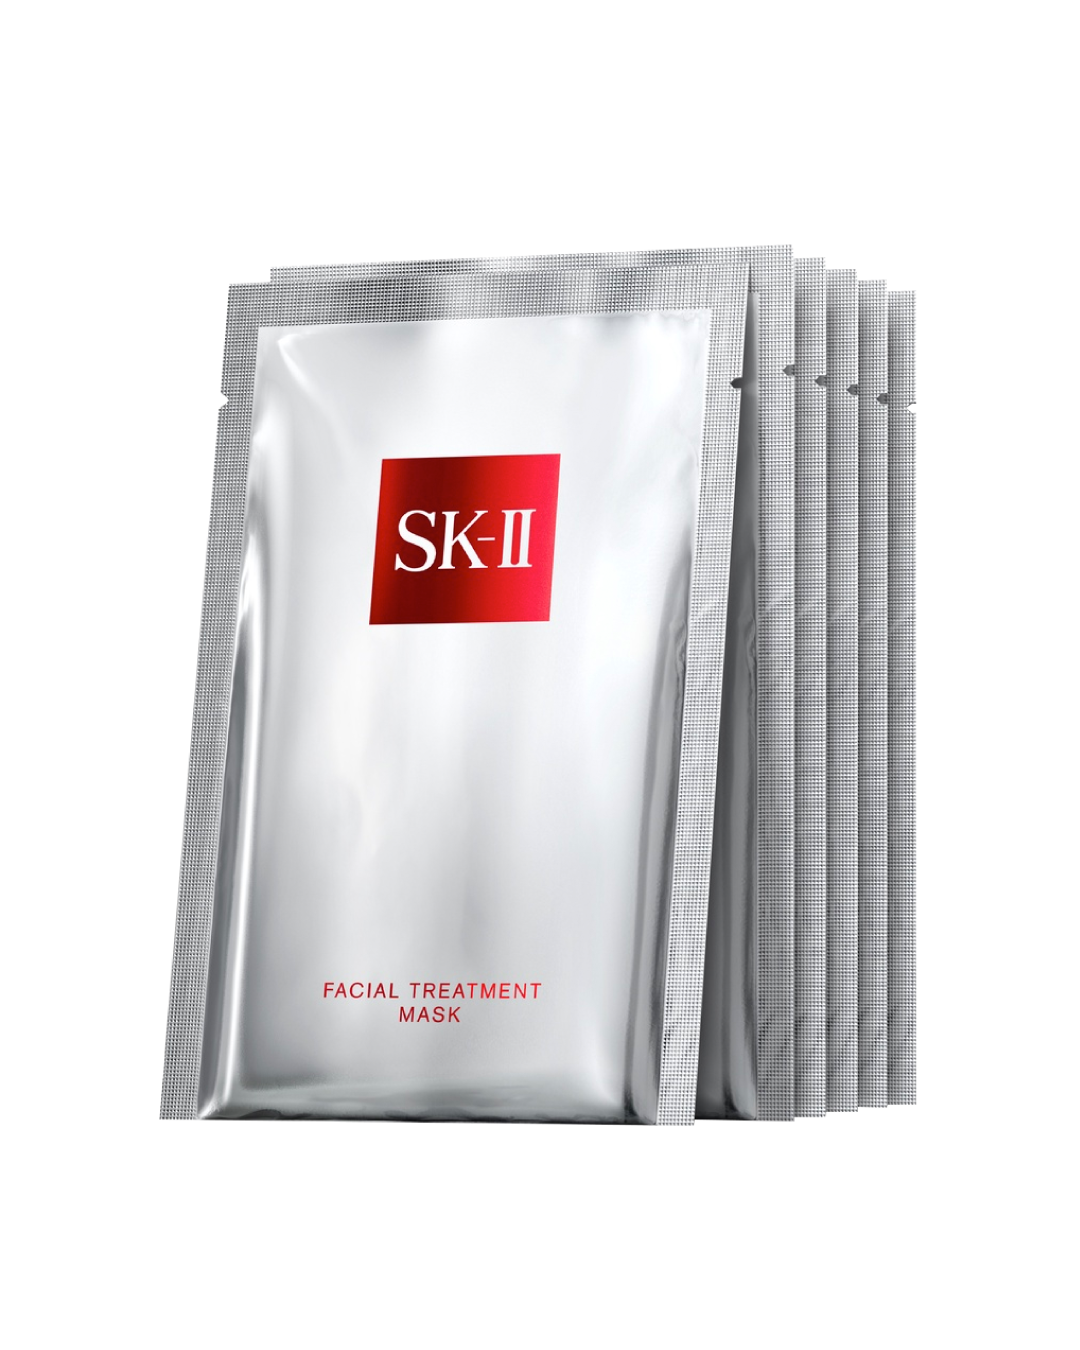 SK-II Facial Treatment Mask (6 sheets) - Best Buy World Philippines